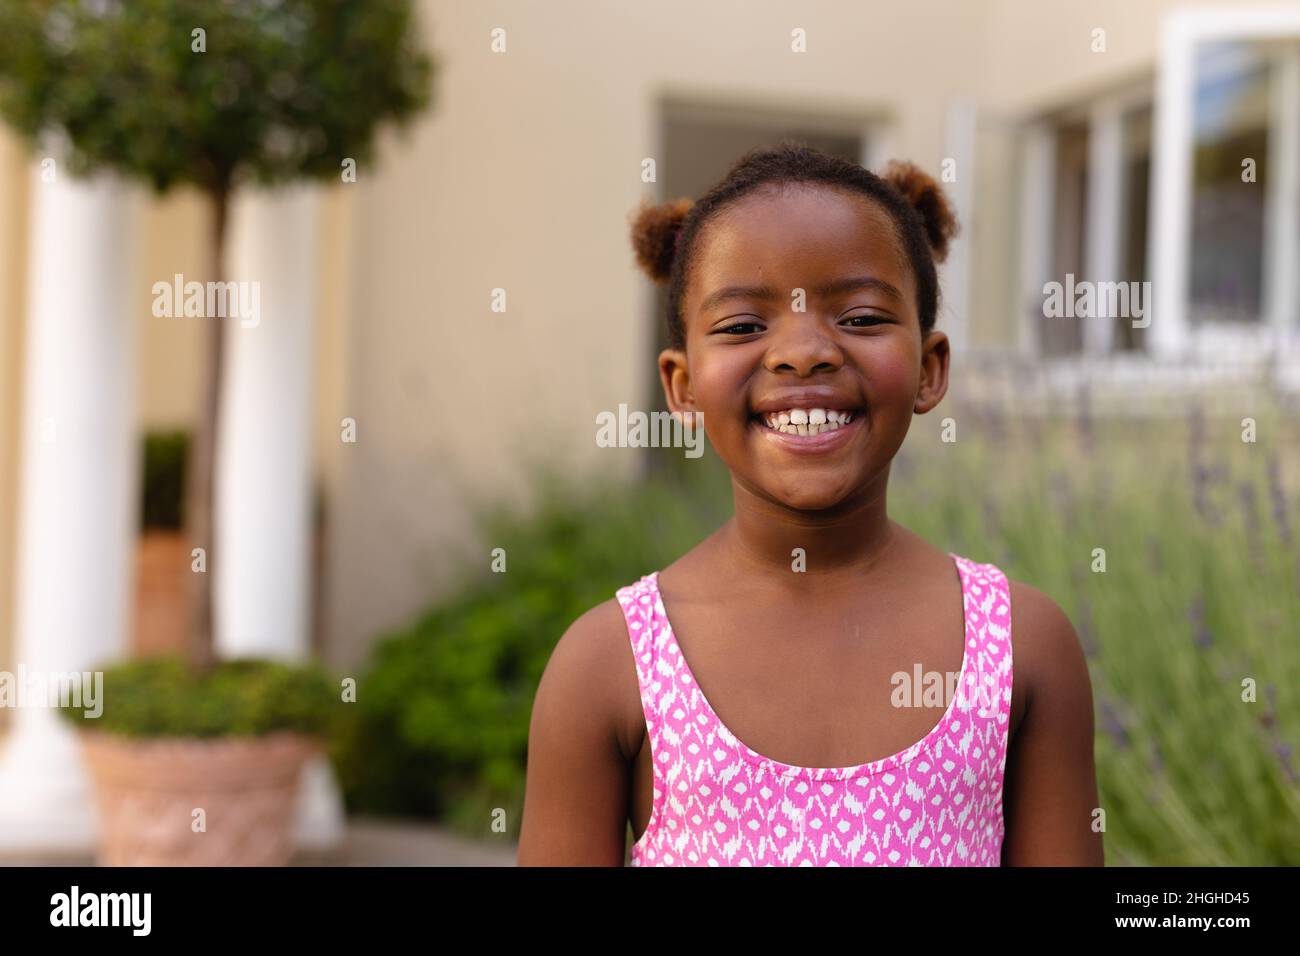 Portrait of happy cute african american girl wearing pink sleeveless top Stock Photo